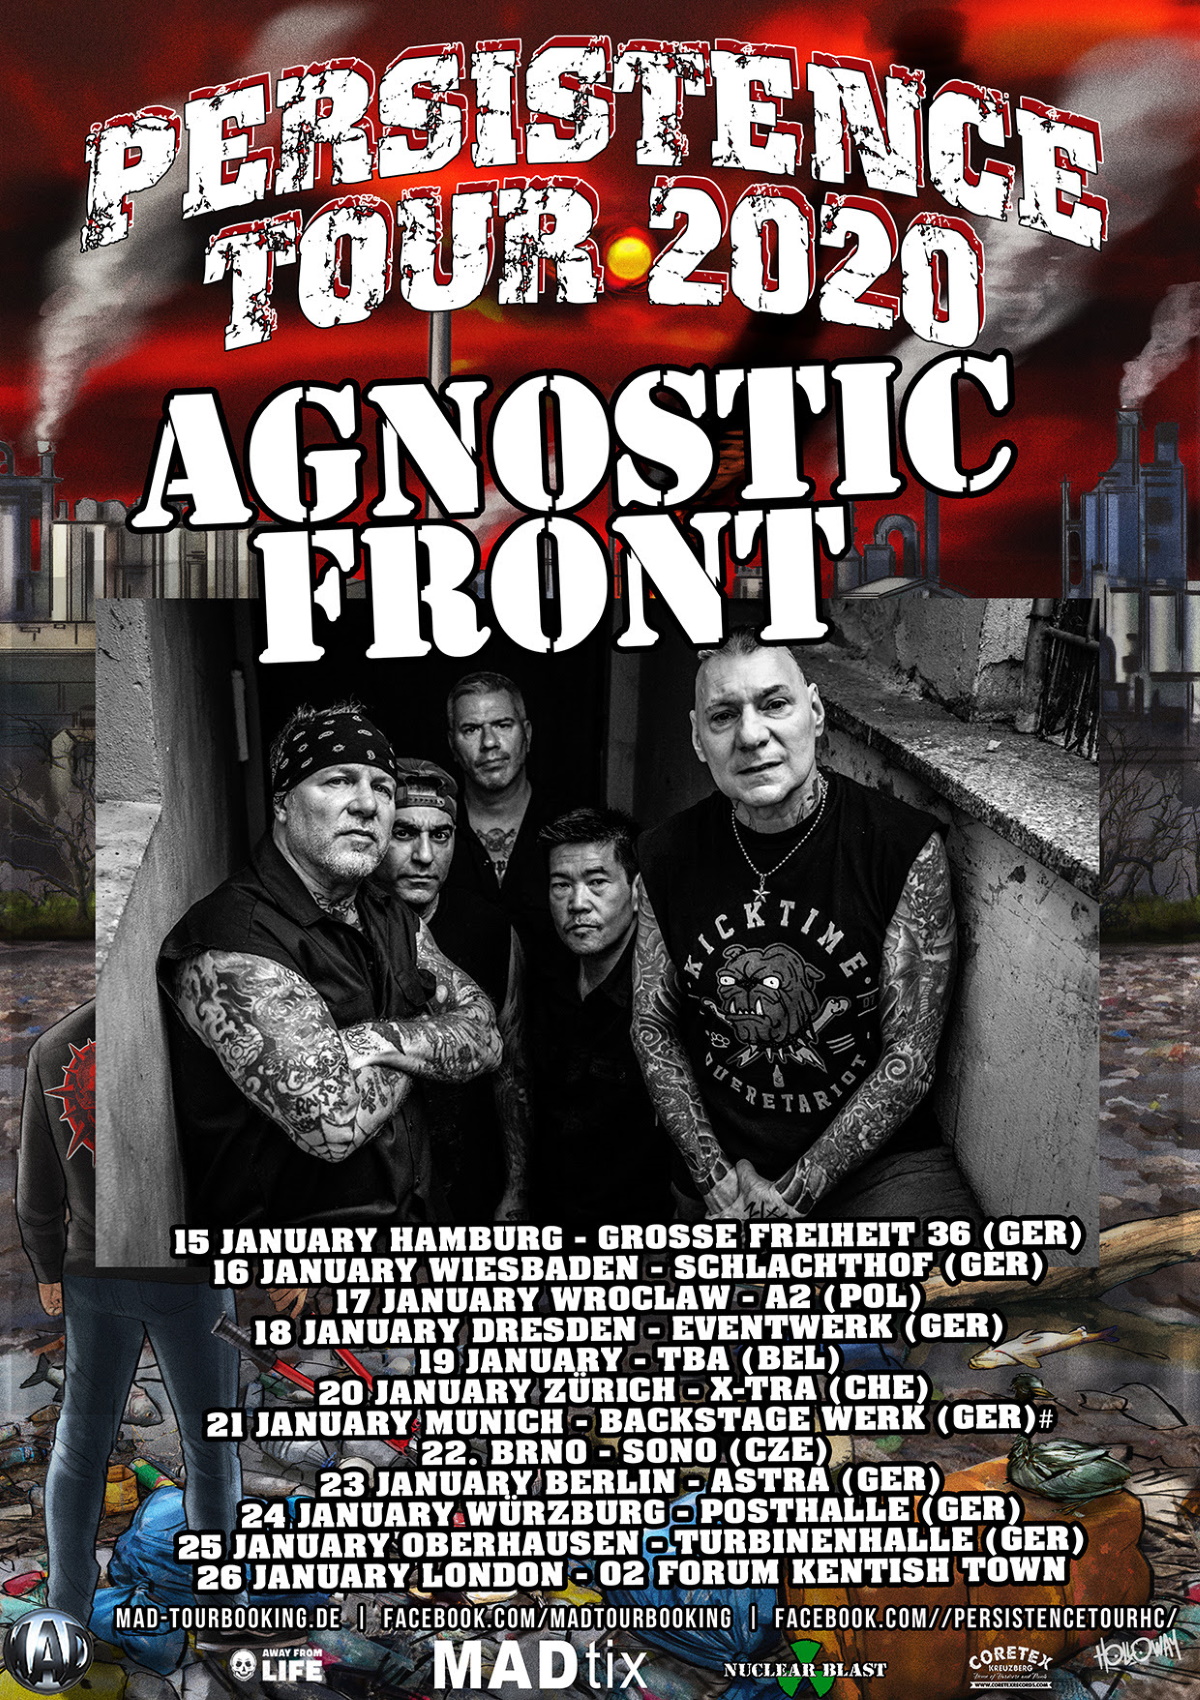 Legendary NYHC pioneers AGNOSTIC FRONT have been confirmed to play the 2020 installment of the renowned Persistence Tour alongside fellow genre veterans GORILLA BISCUITS.